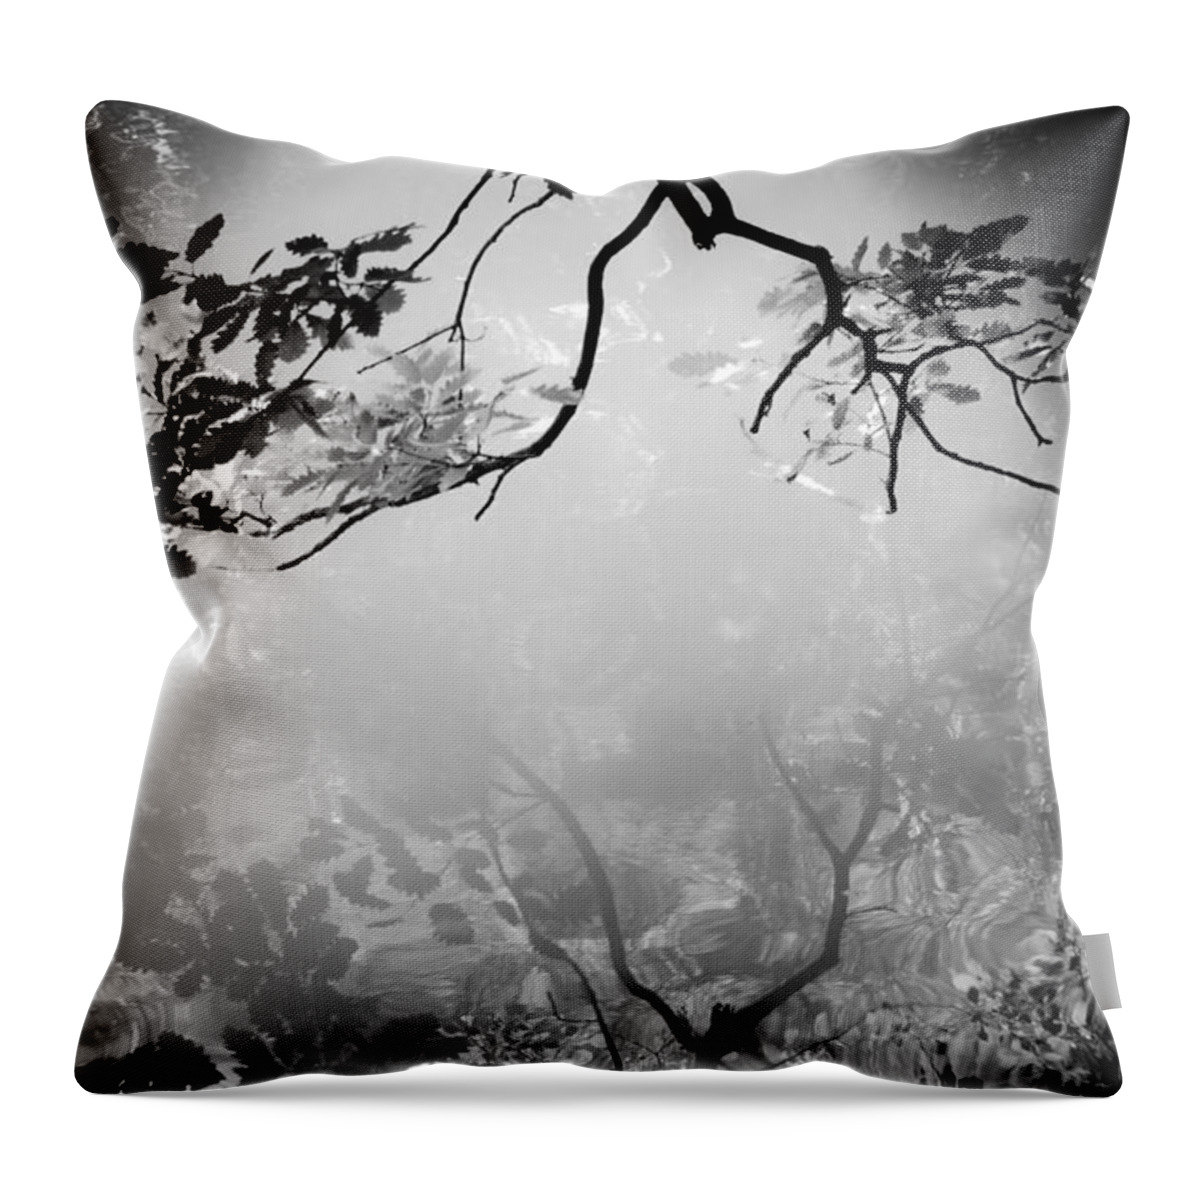 Leaves Throw Pillow featuring the photograph Daydream by Dorit Fuhg